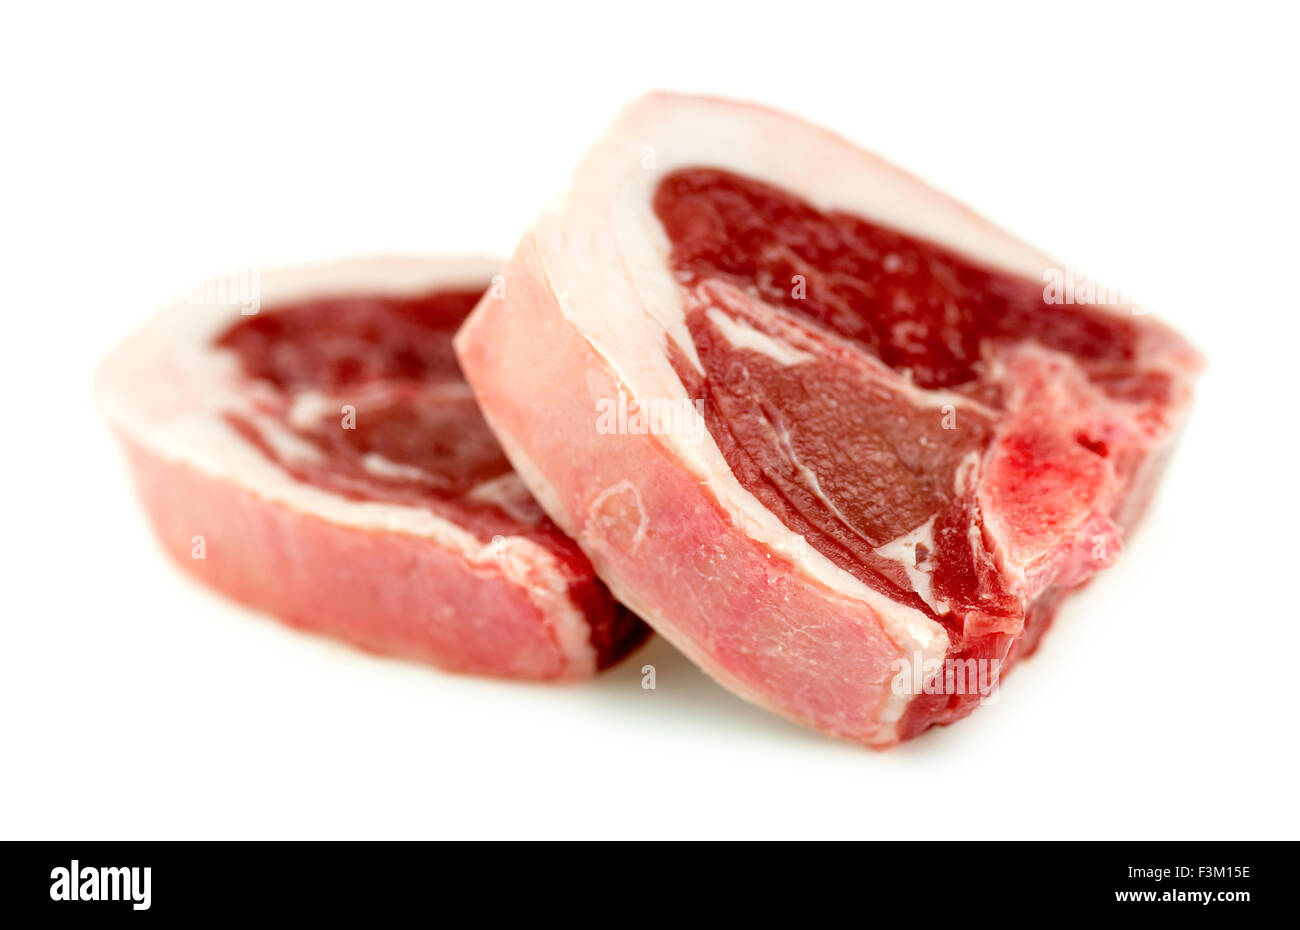 Pieces of raw uncooked lamb mutton meat Stock Photo